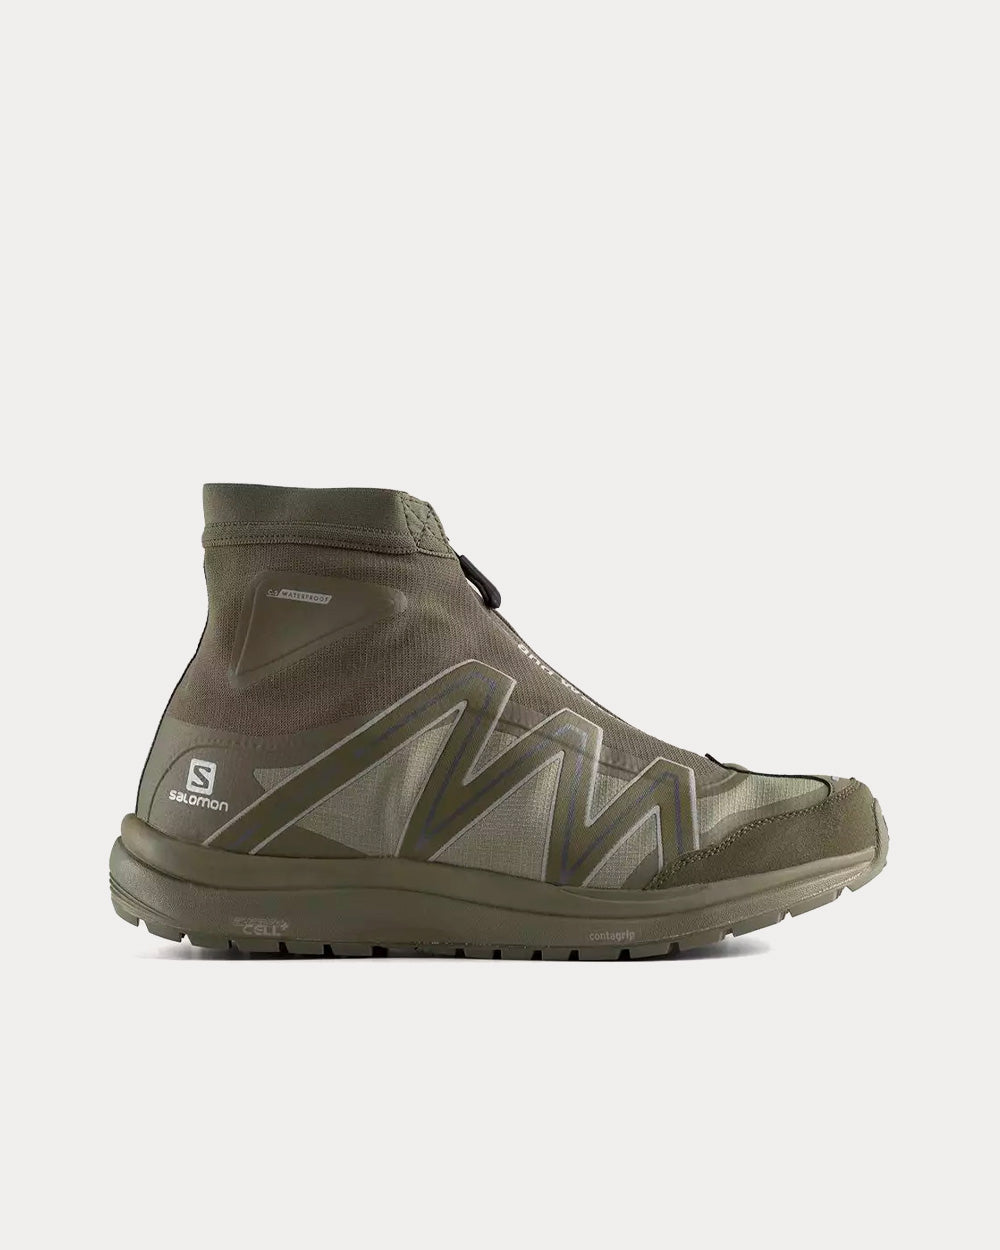 x and Wander Odyssey CSWP Khaki High Top Sneakers